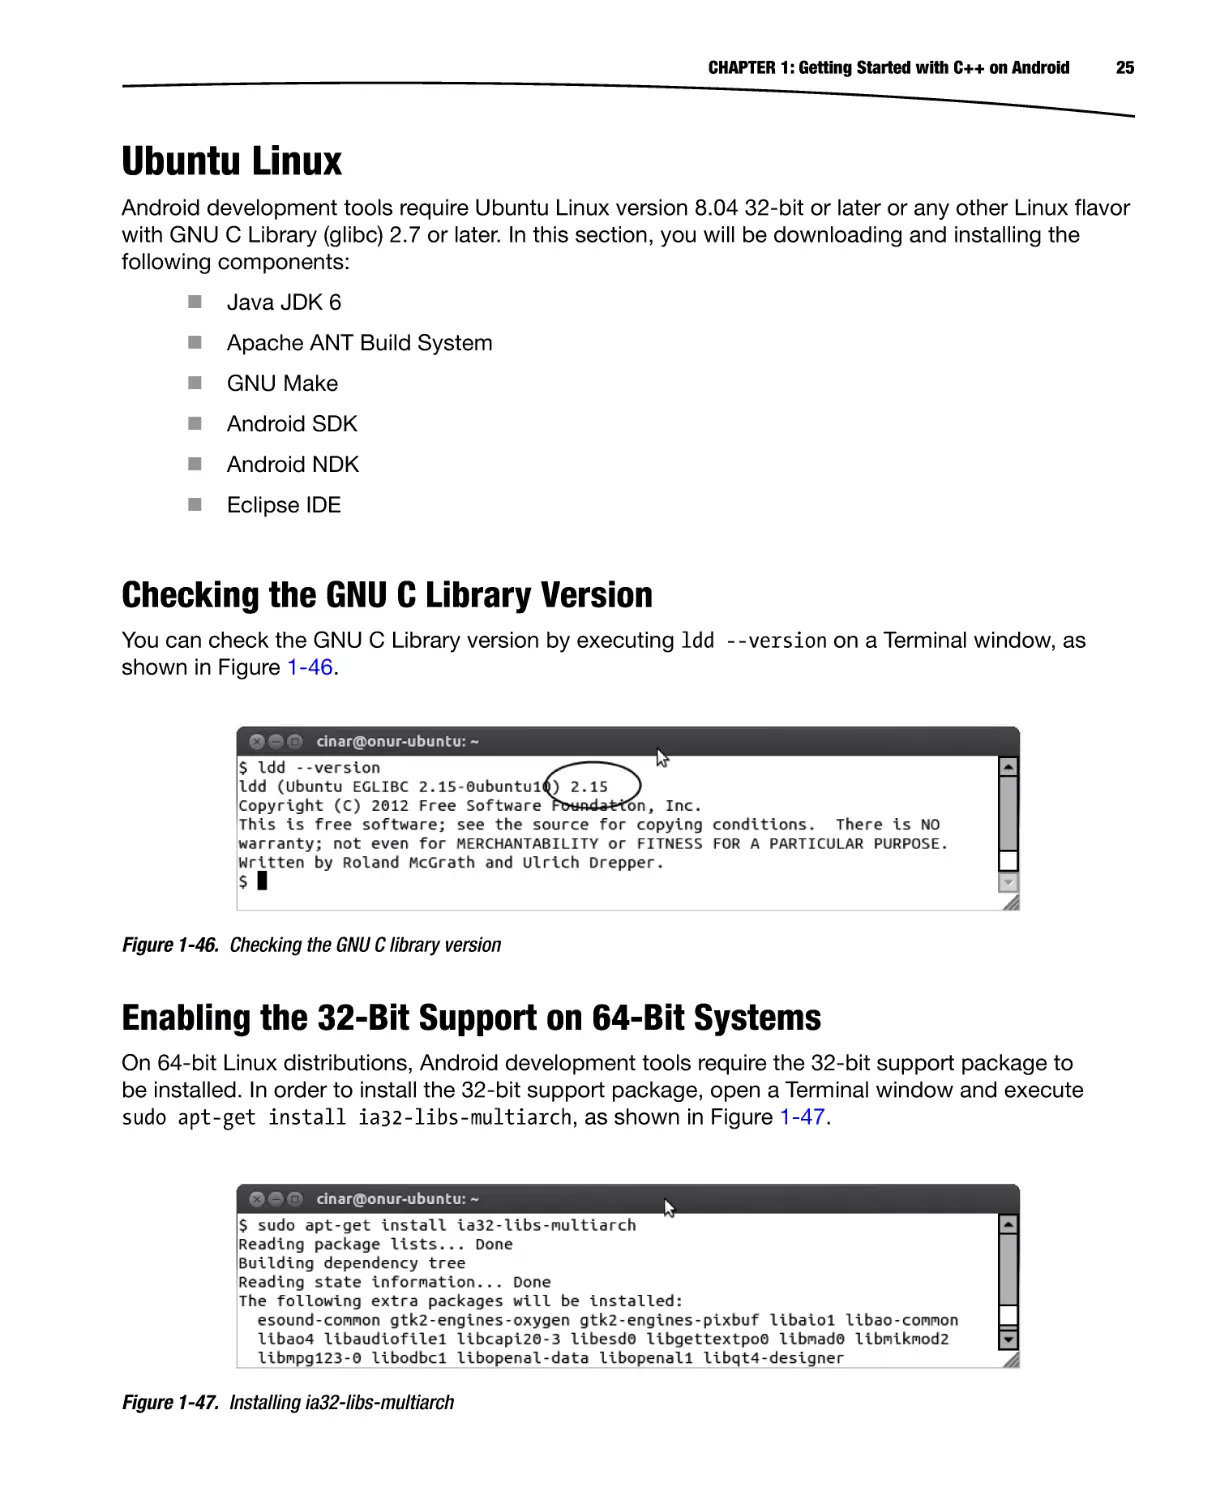 Ubuntu Linux
Checking the GNU C Library Version
Enabling the 32-Bit Support on 64-Bit Systems